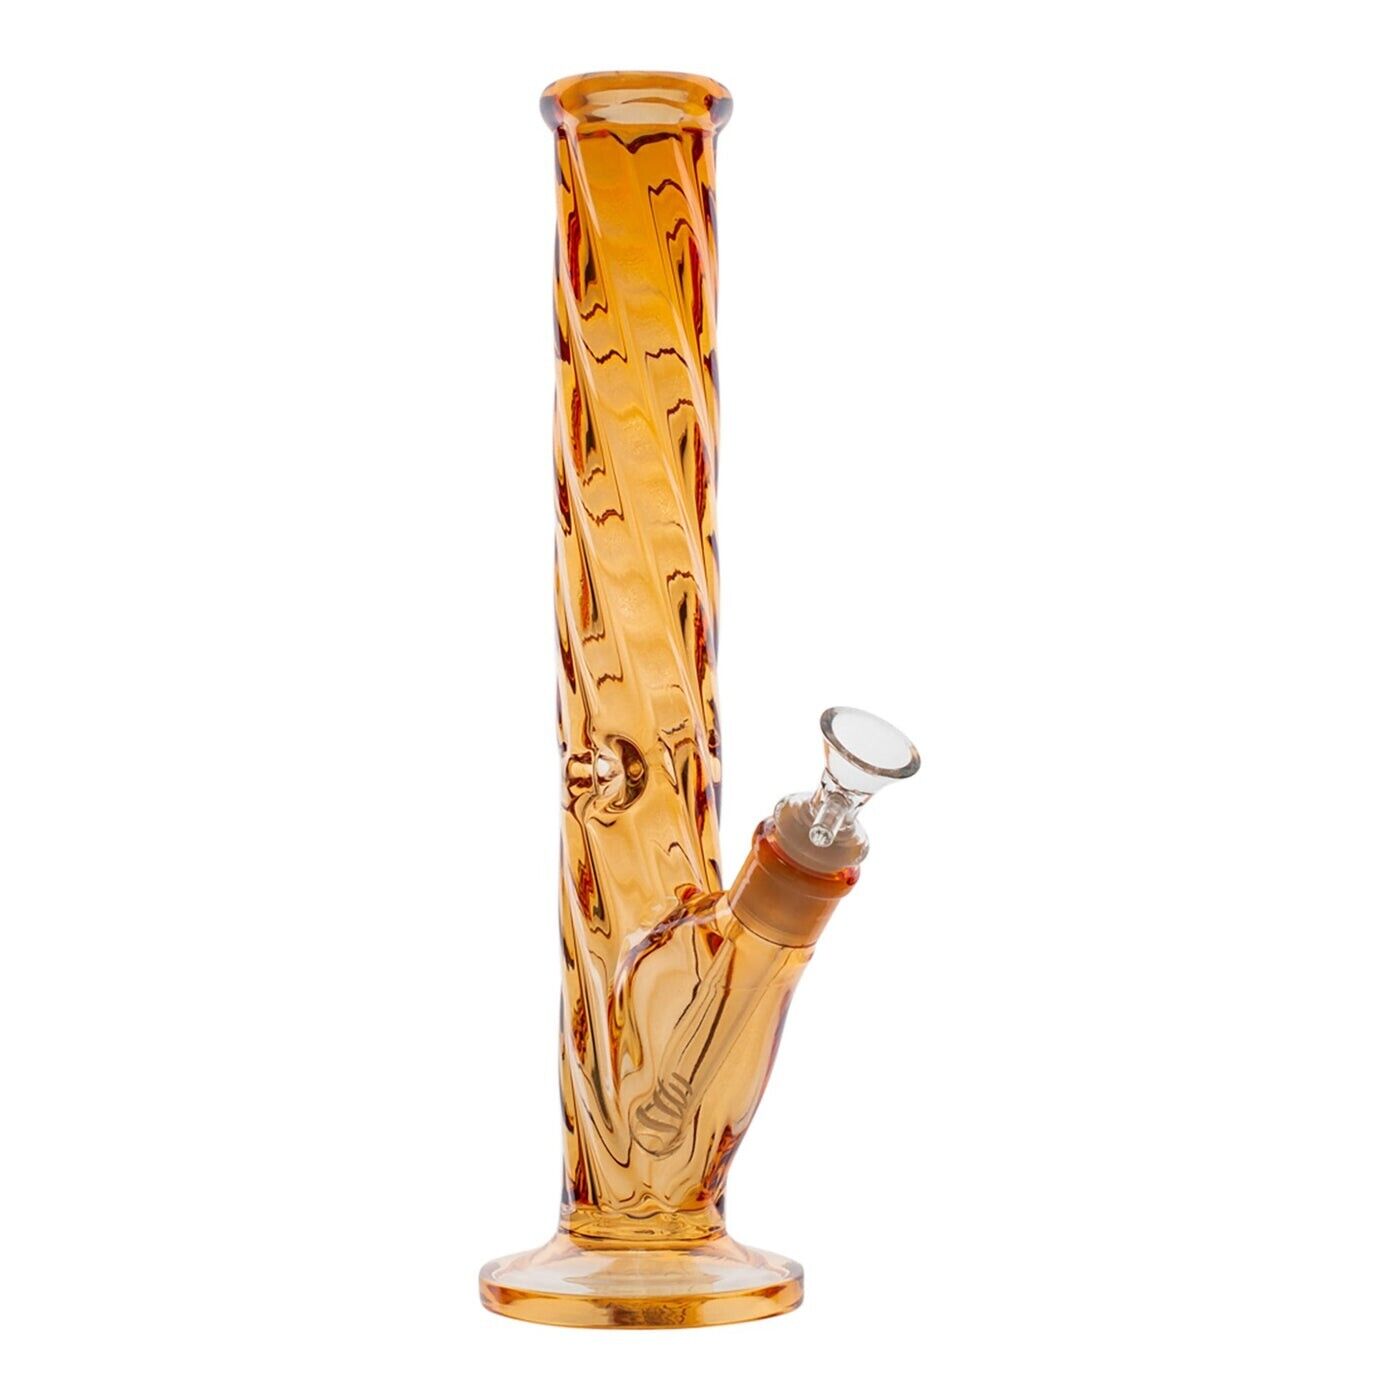 RORA 13 Heavy Glass Bongs Percolator Water Pipe Smoking Hookah 14mm Bowl Thick. Available Now for 37.99